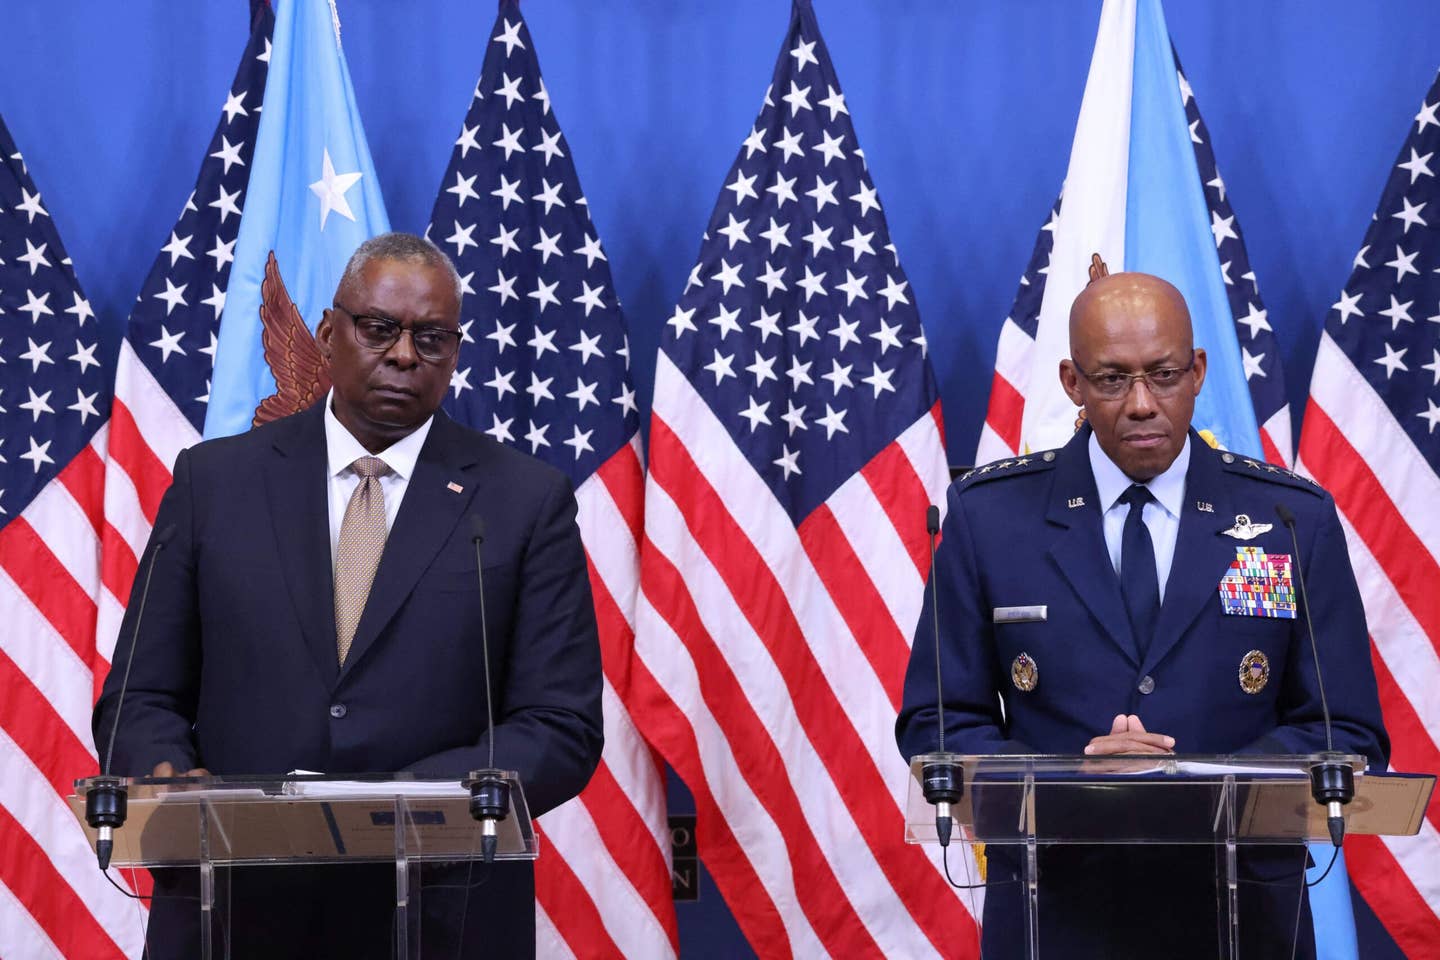 US Air Force general Charles Quinton Brown Jr. (R) and US Defence Secretary Lloyd Austin speaks (L) talked about continued support for Ukraine and Israel. (Photo by SIMON WOHLFAHRT / AFP) (Photo by SIMON WOHLFAHRT/AFP via Getty Images)